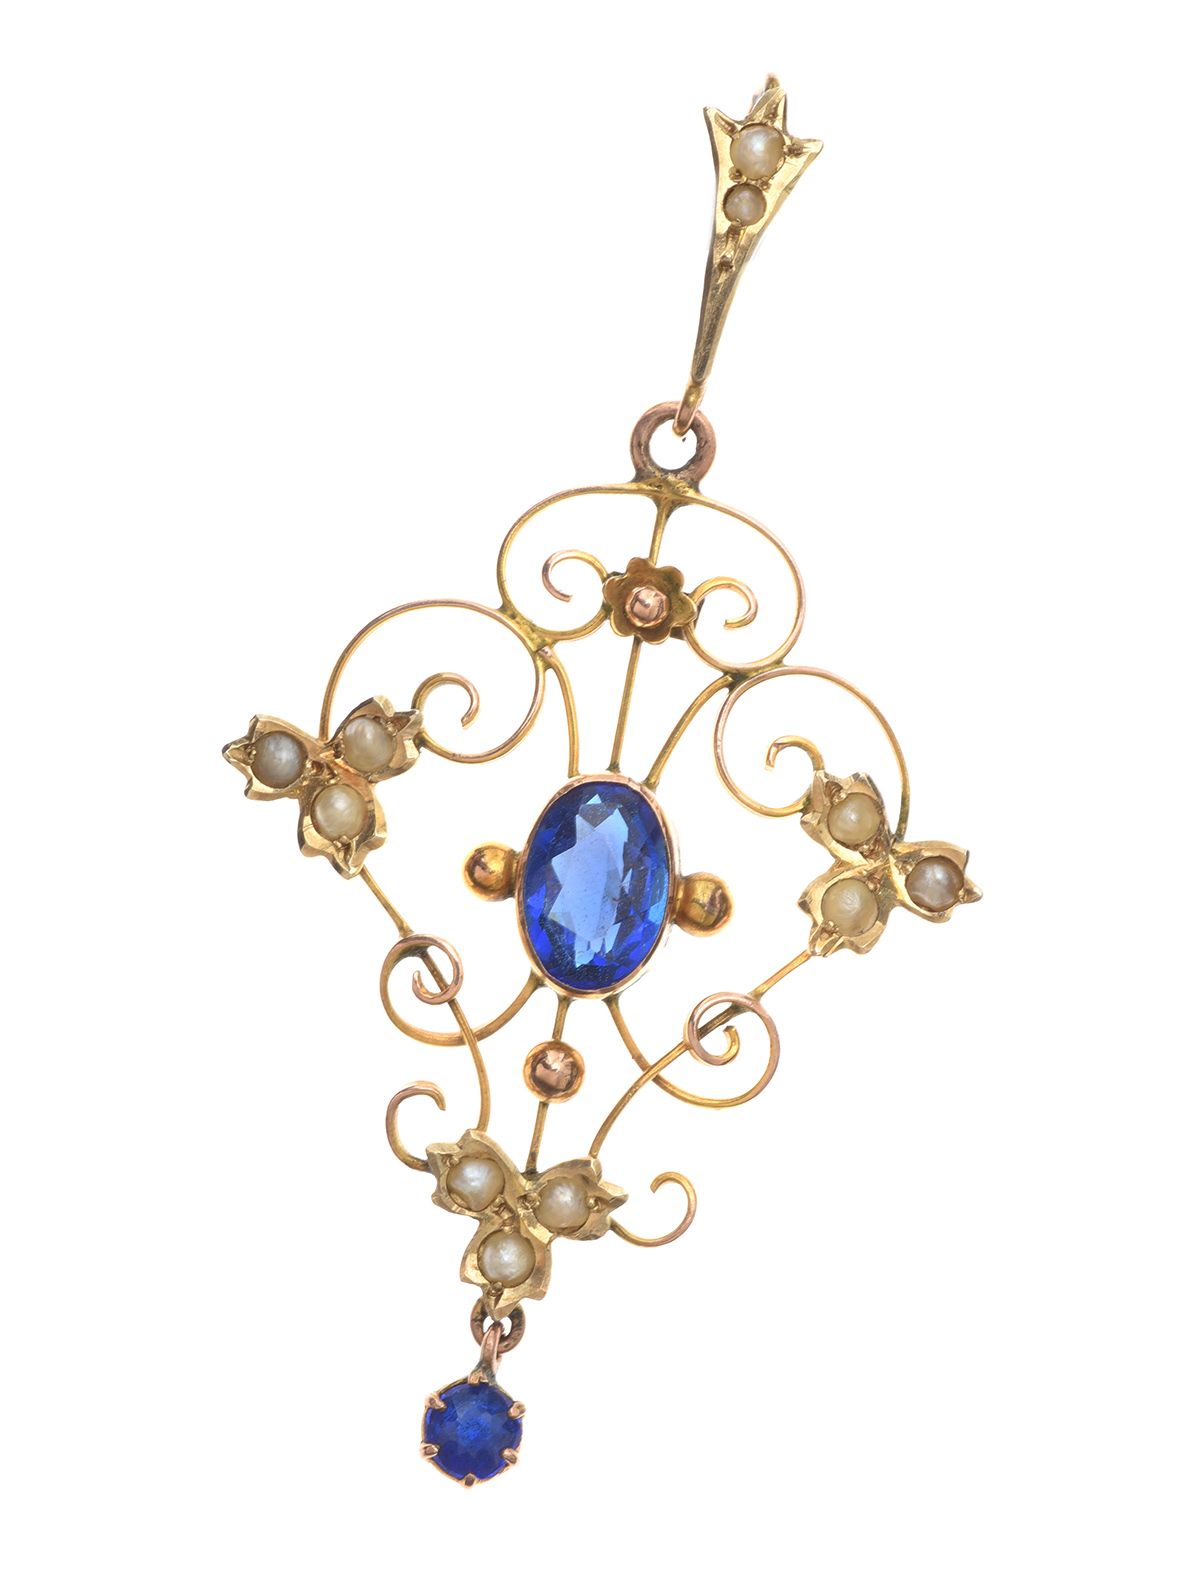 9CT GOLD BLUE STONE AND SEED PEARL PENDANT